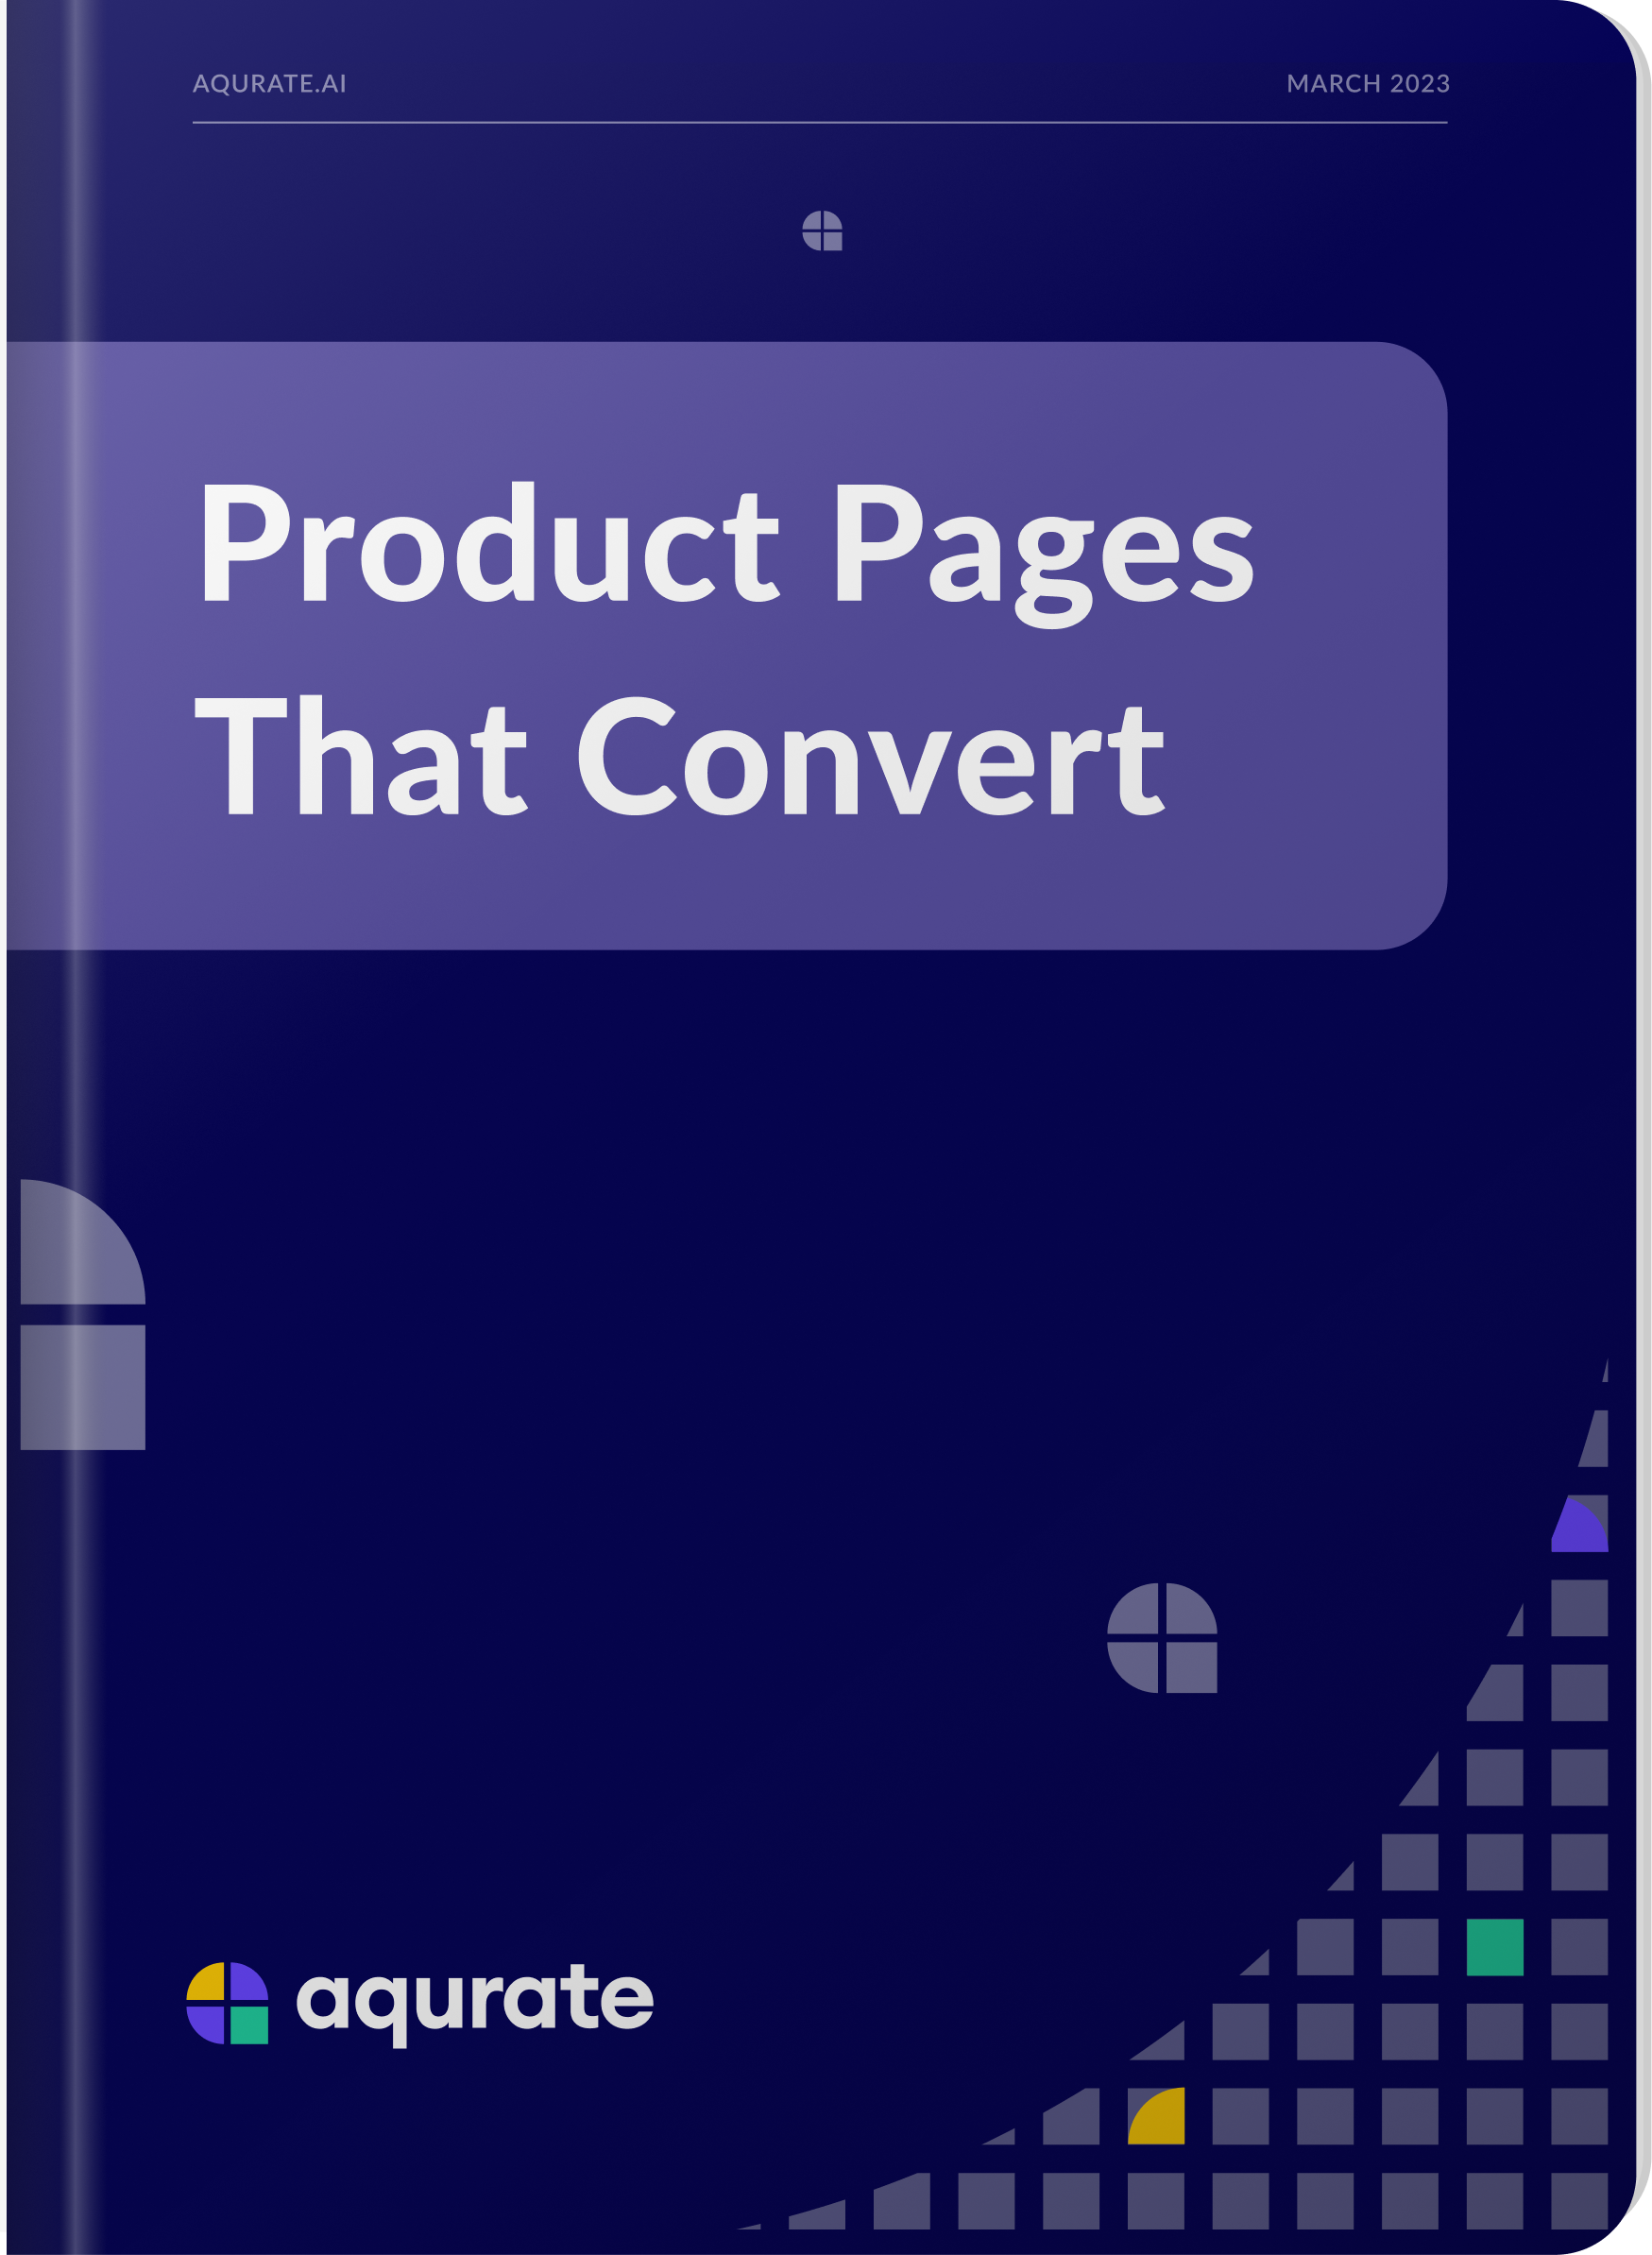 Product Pages that convert